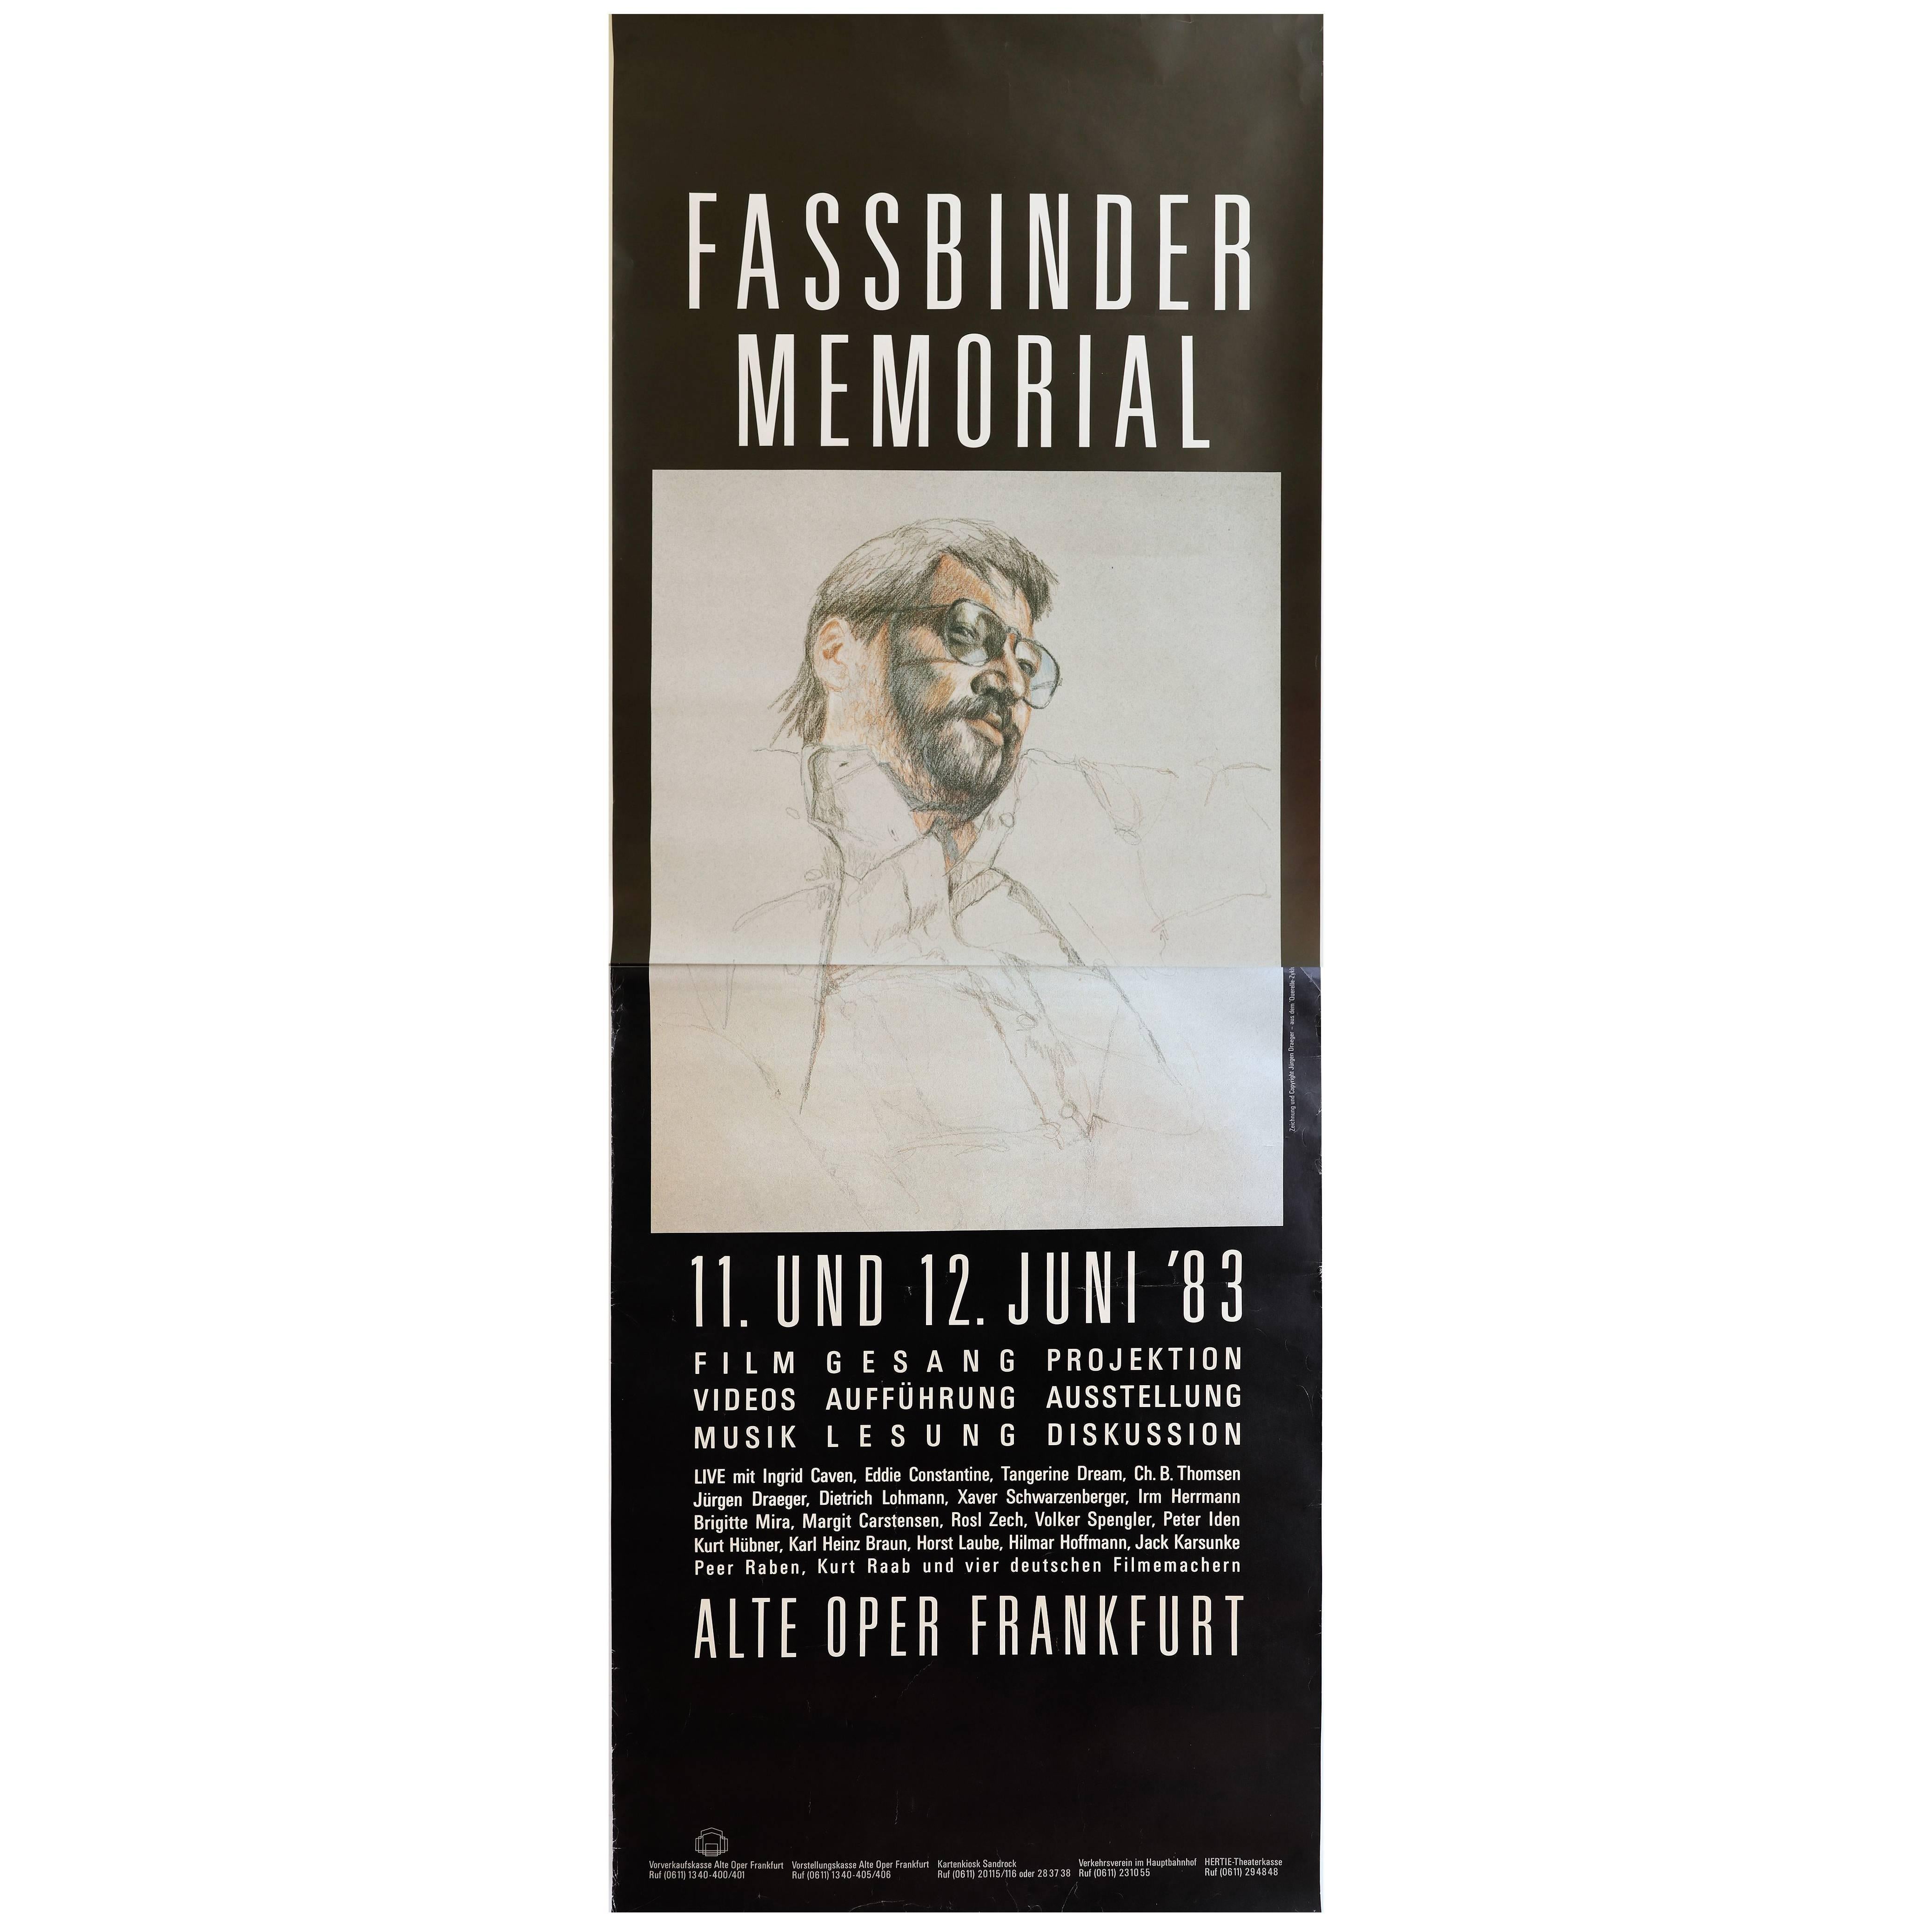 Rare Two-Piece Poster for R.W. Fassbinder Memorial in Germany, 1983